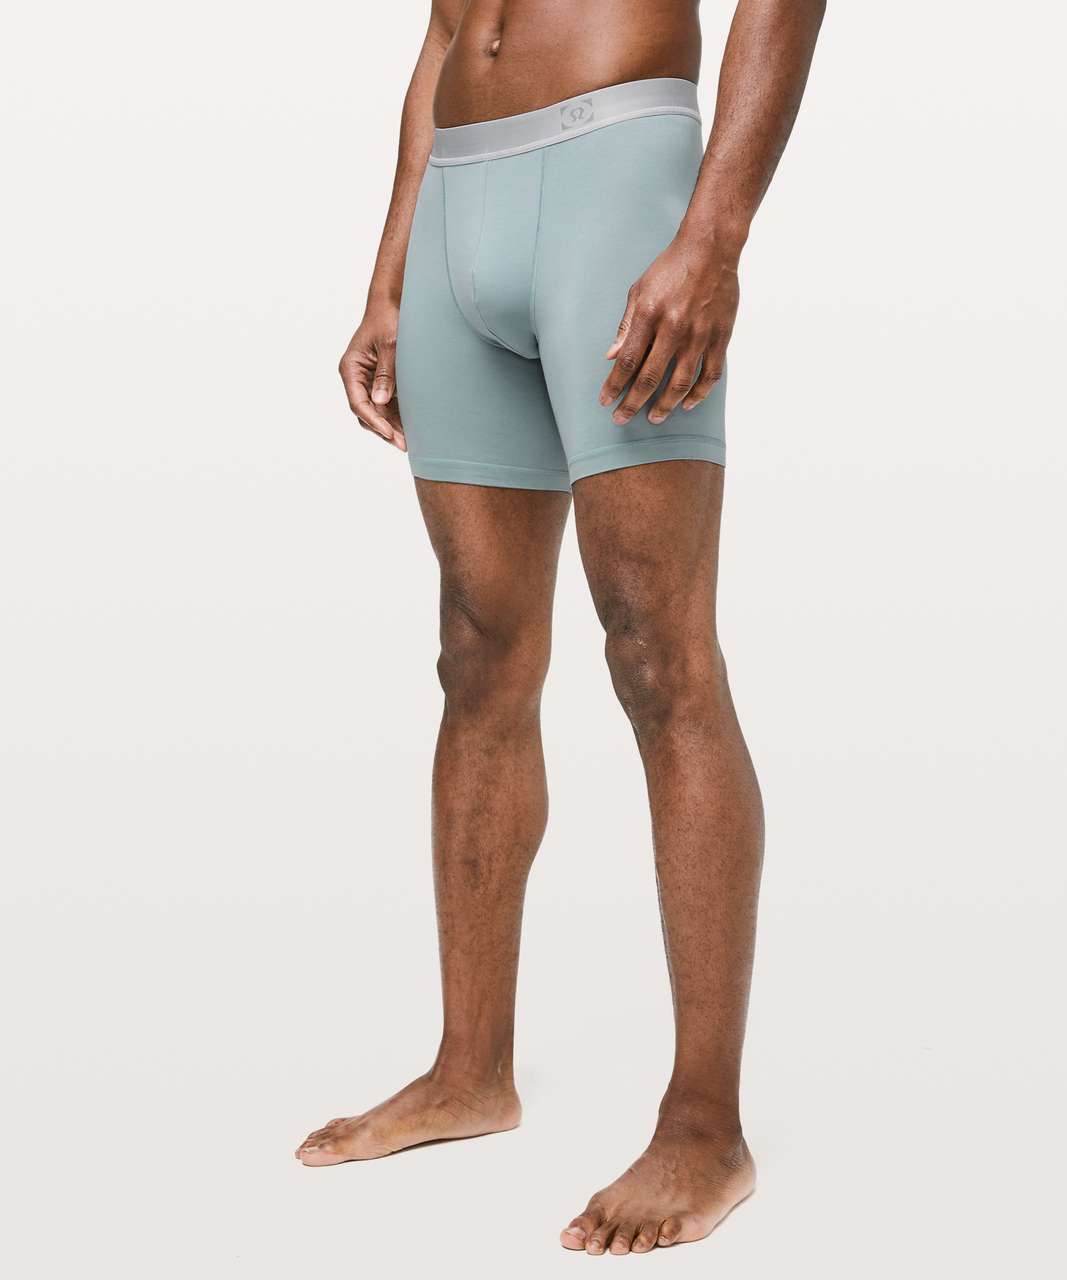 Lululemon Always In Motion Boxer *The Long One 7" - Blue Cast